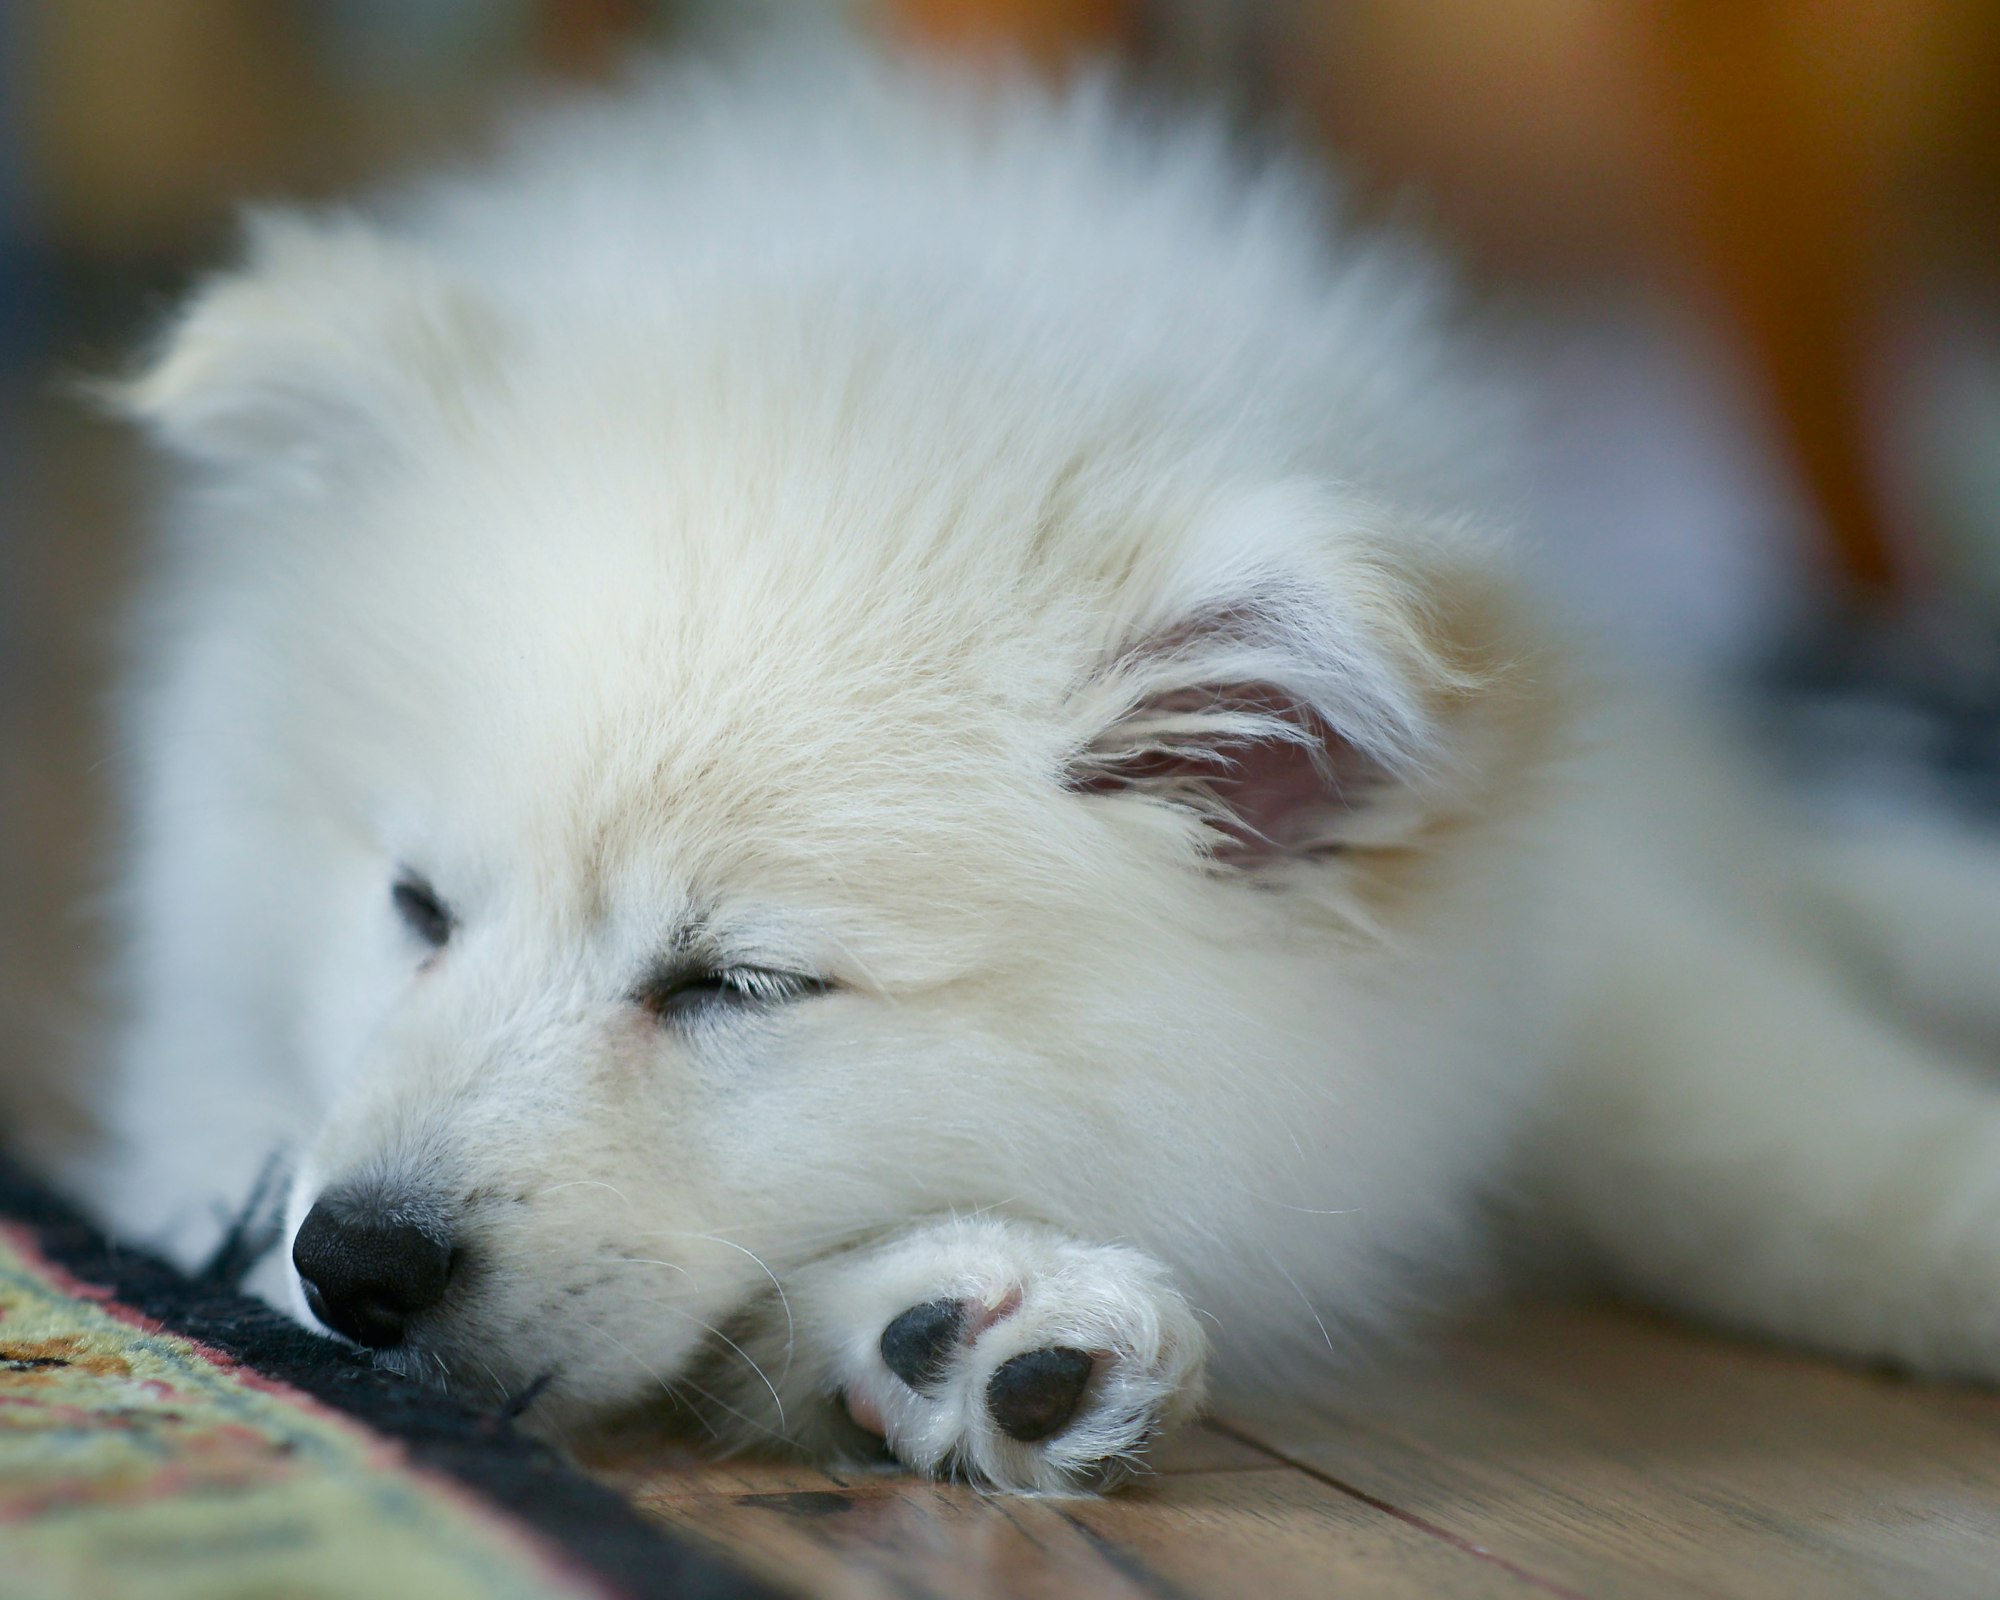 Why Do Puppies Sleep a Lot?